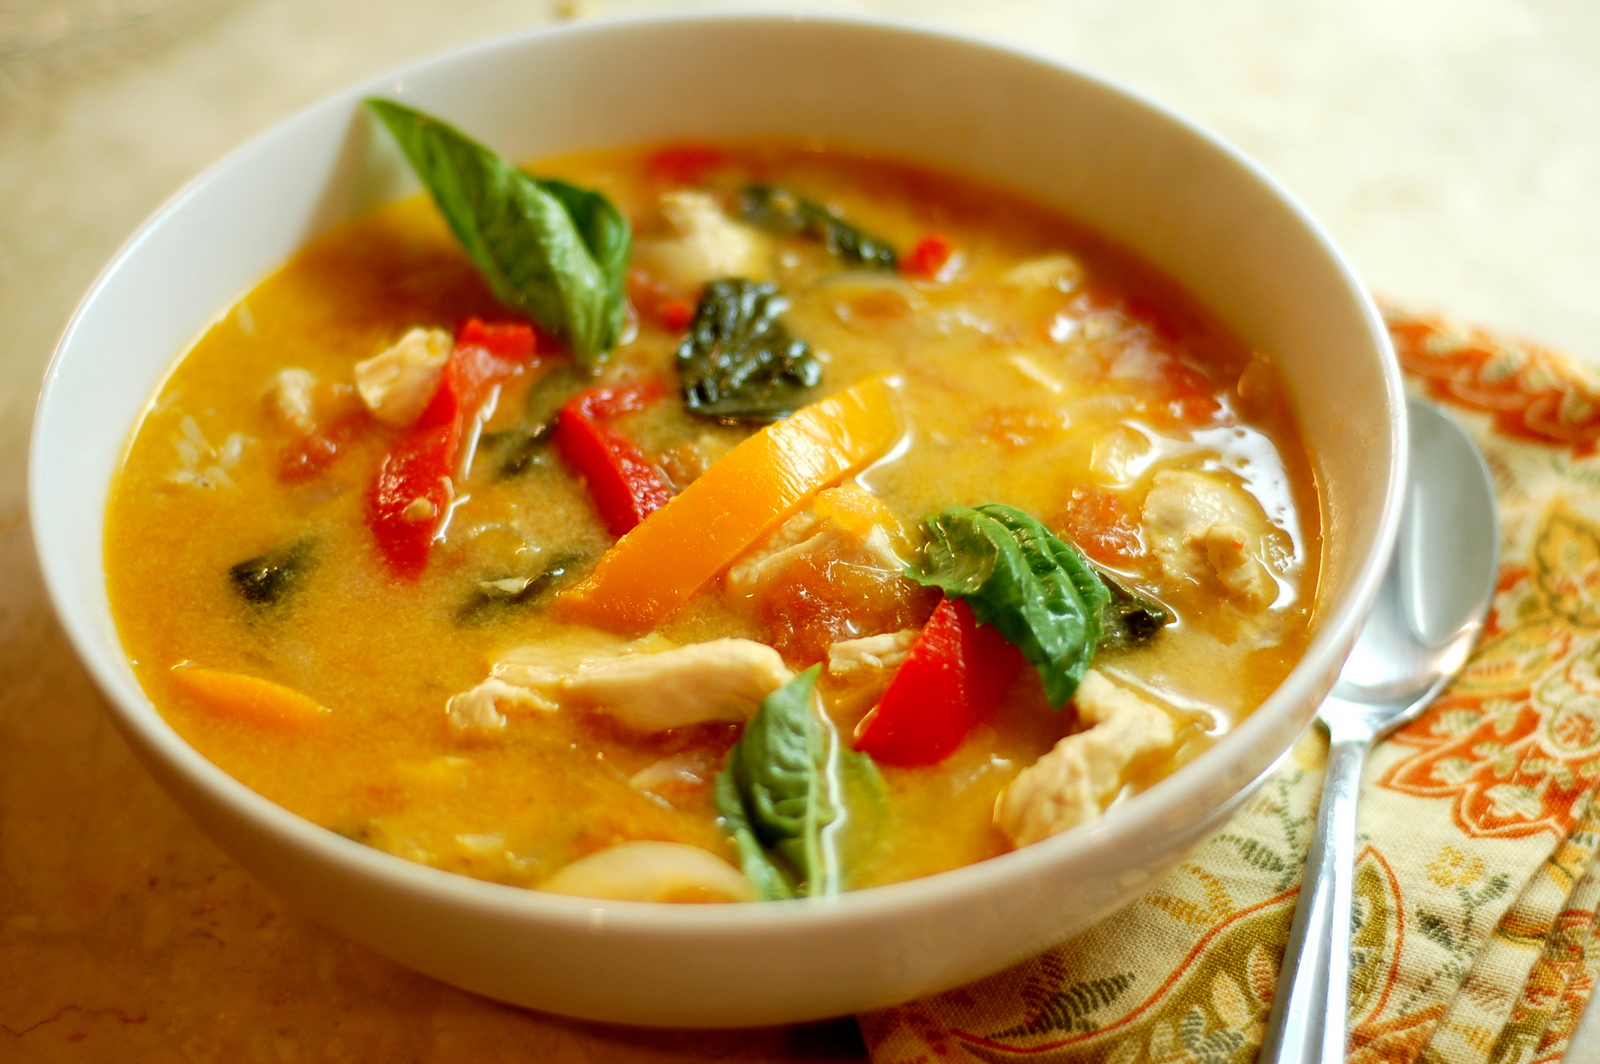 Can We Guess Your Age and Dream Job Based on What Thai Food You Order? Thai chicken curry